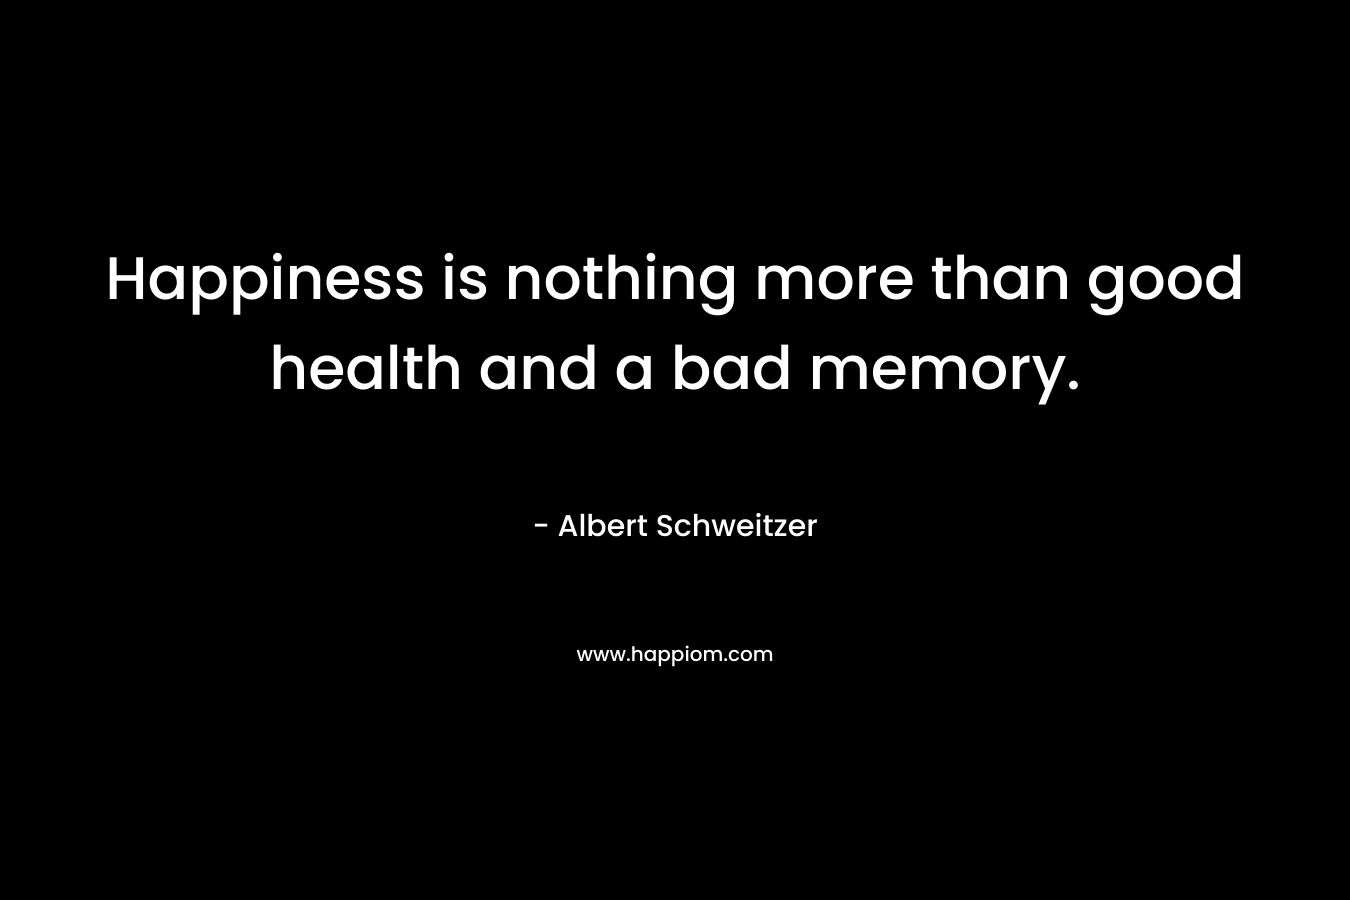 Happiness is nothing more than good health and a bad memory.